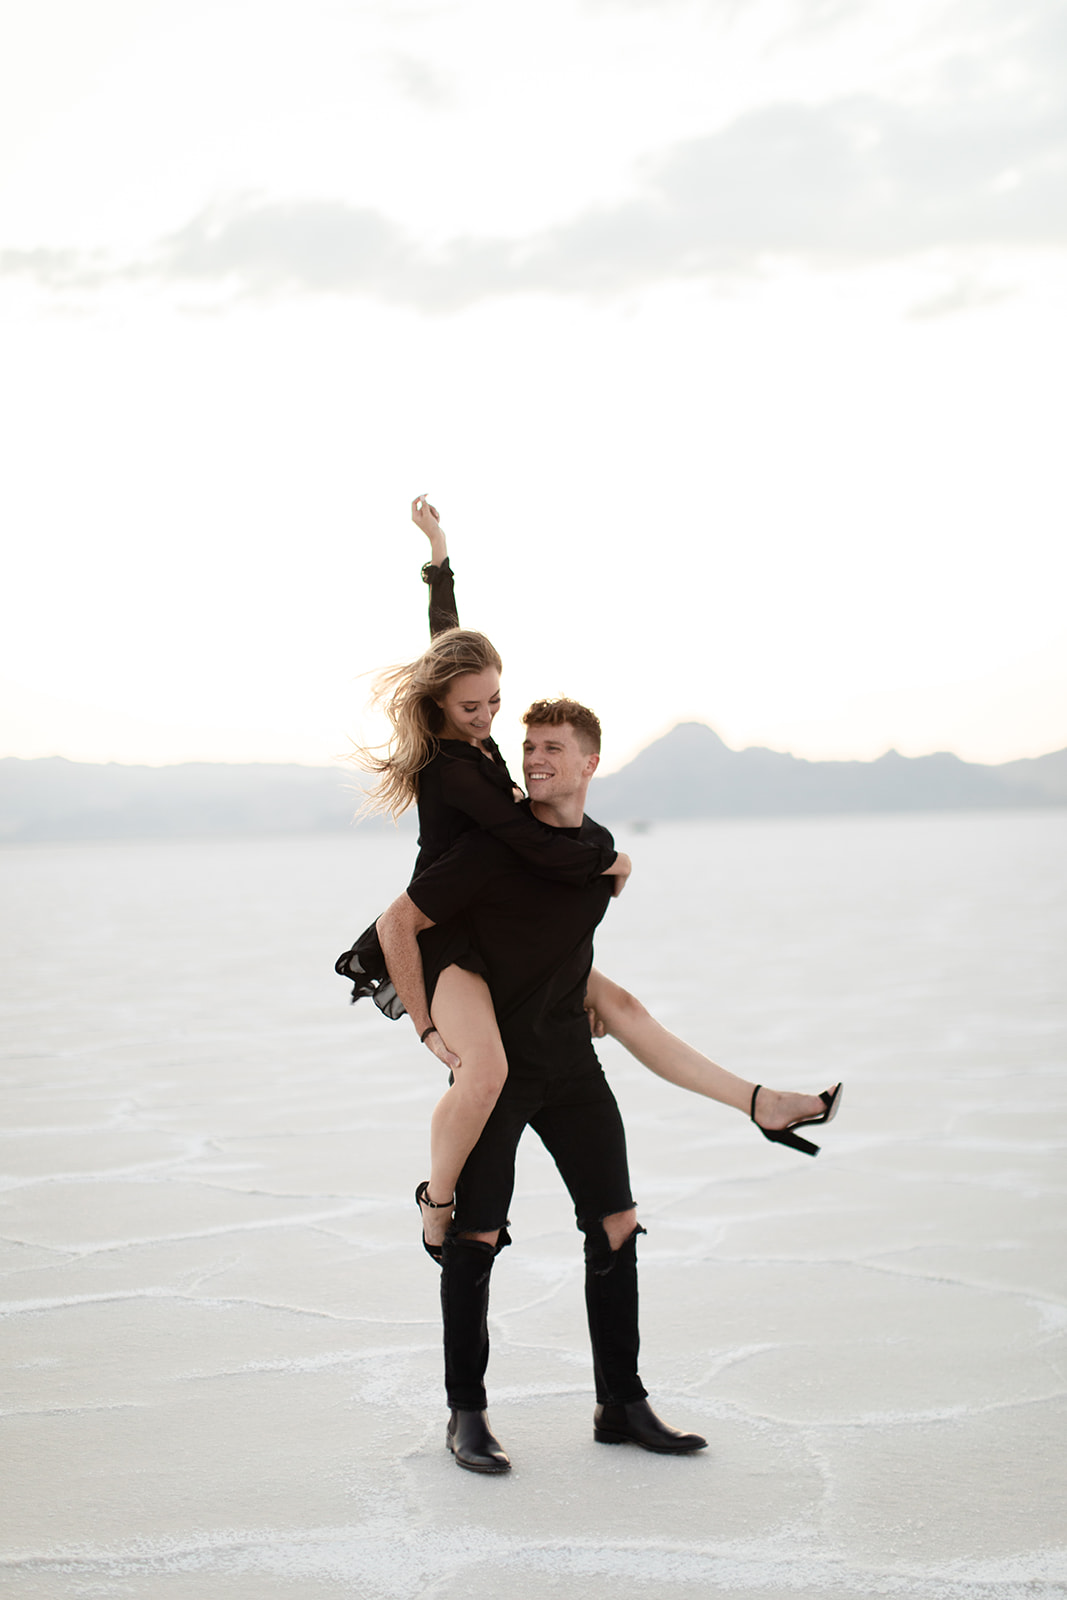 Utah engagement session at the salt flats with a cute playful bride-to-be piggybacking on her fiance dress in a black flowy dress and tall black heels. Utah wedding photography utah engagement photography session salt flats engagement session engagement session outfit inspiration what to wear for an engagement session playful photography sessions in norrthern utah #utahbrideandgroom #destinationproposal #destinationengagement #destinationengagementphotography #engagementoutfit #engagementphotographytips #utahweddingphotography #dcweddingphotography #virginiaweddingphotography #virginiaengagementsession #engagementsessiontips